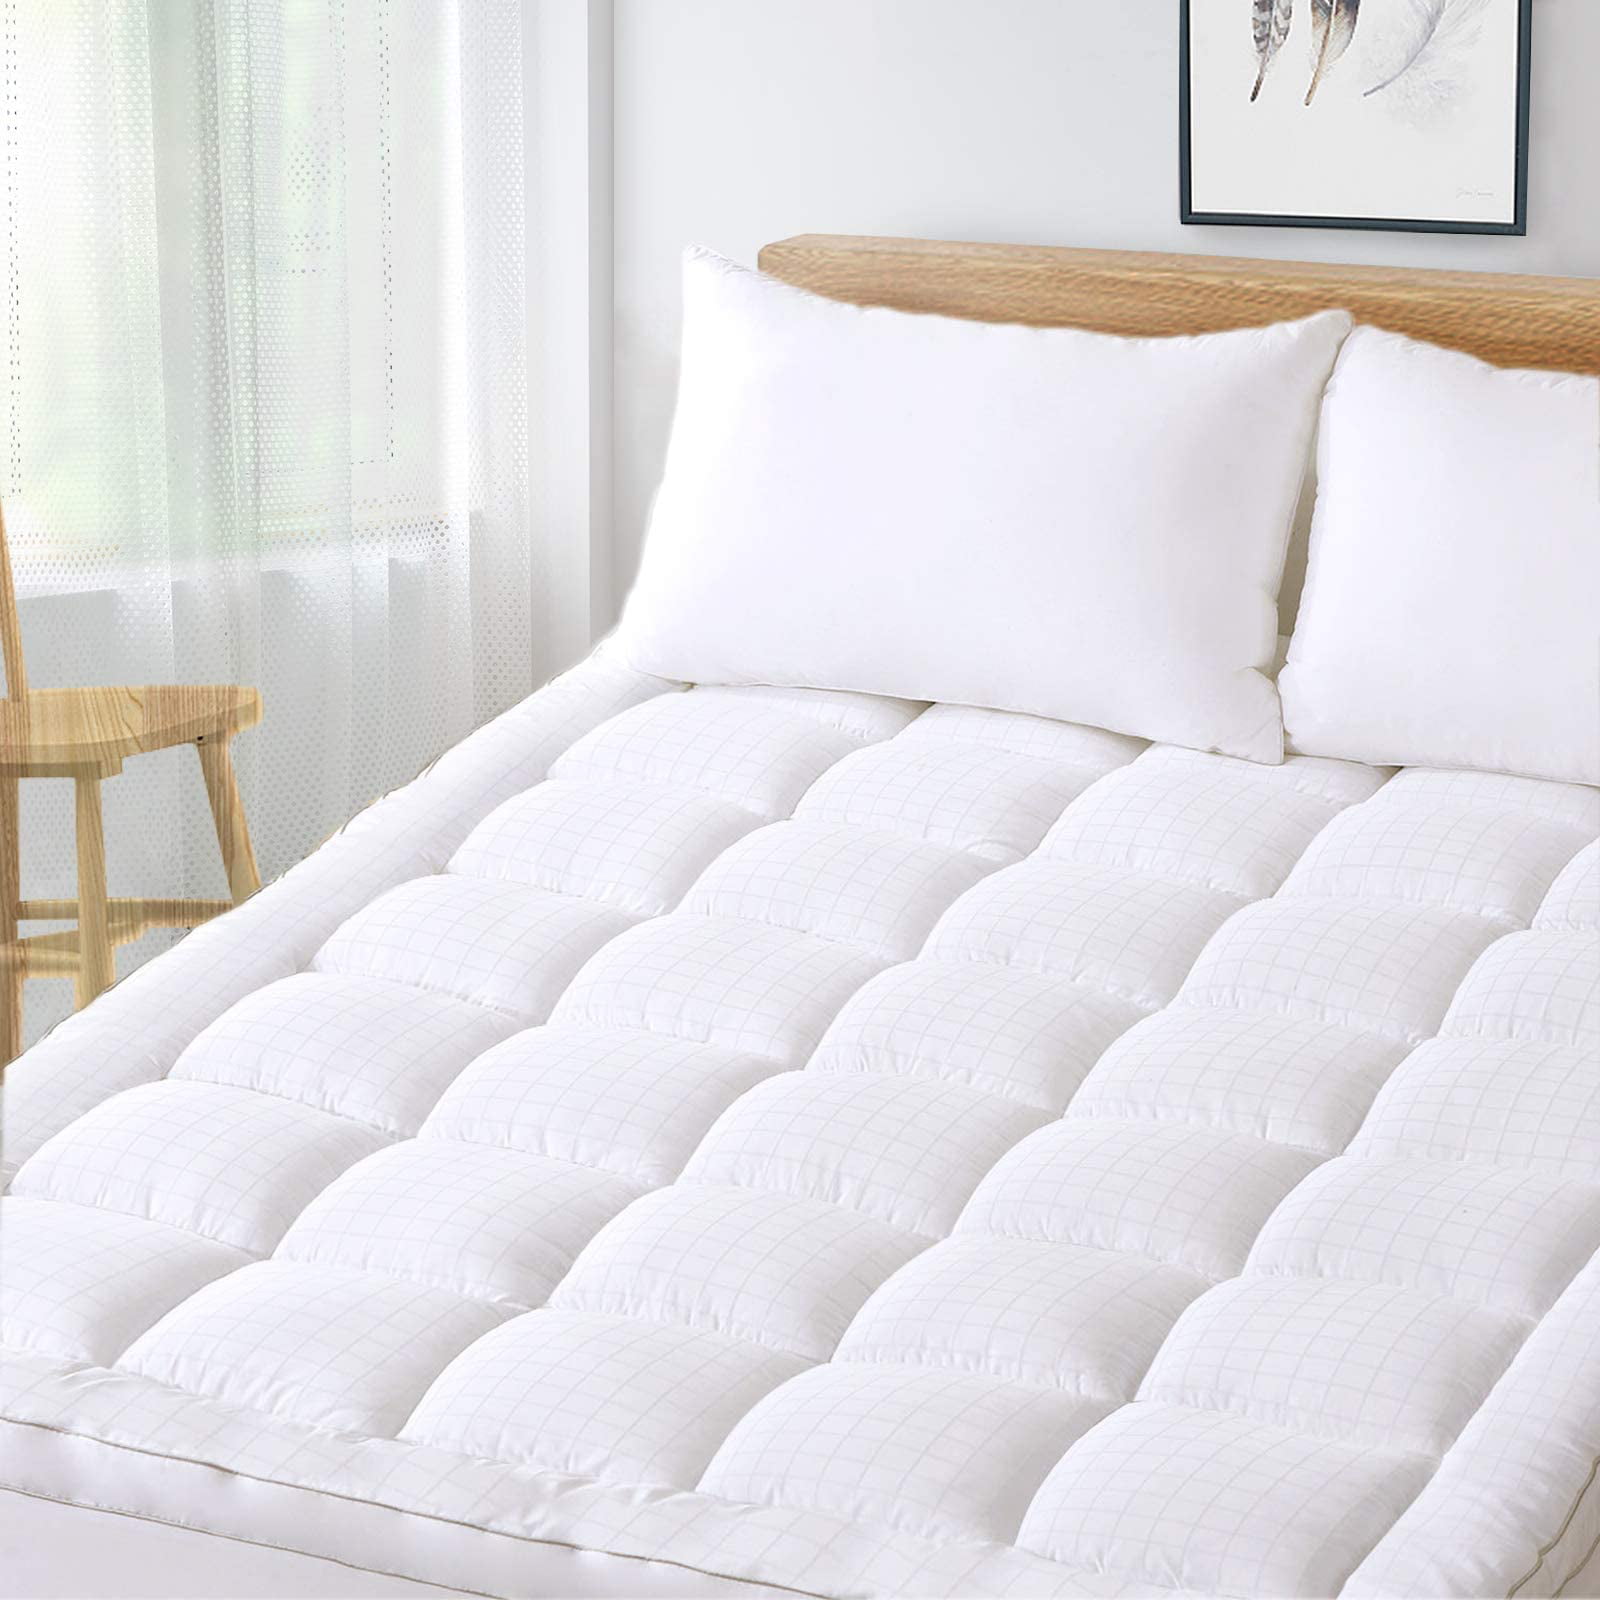 Mattress Topper Bed Pad Pillow Top Cover Quilted Fitted Deep Pocket Cool White 